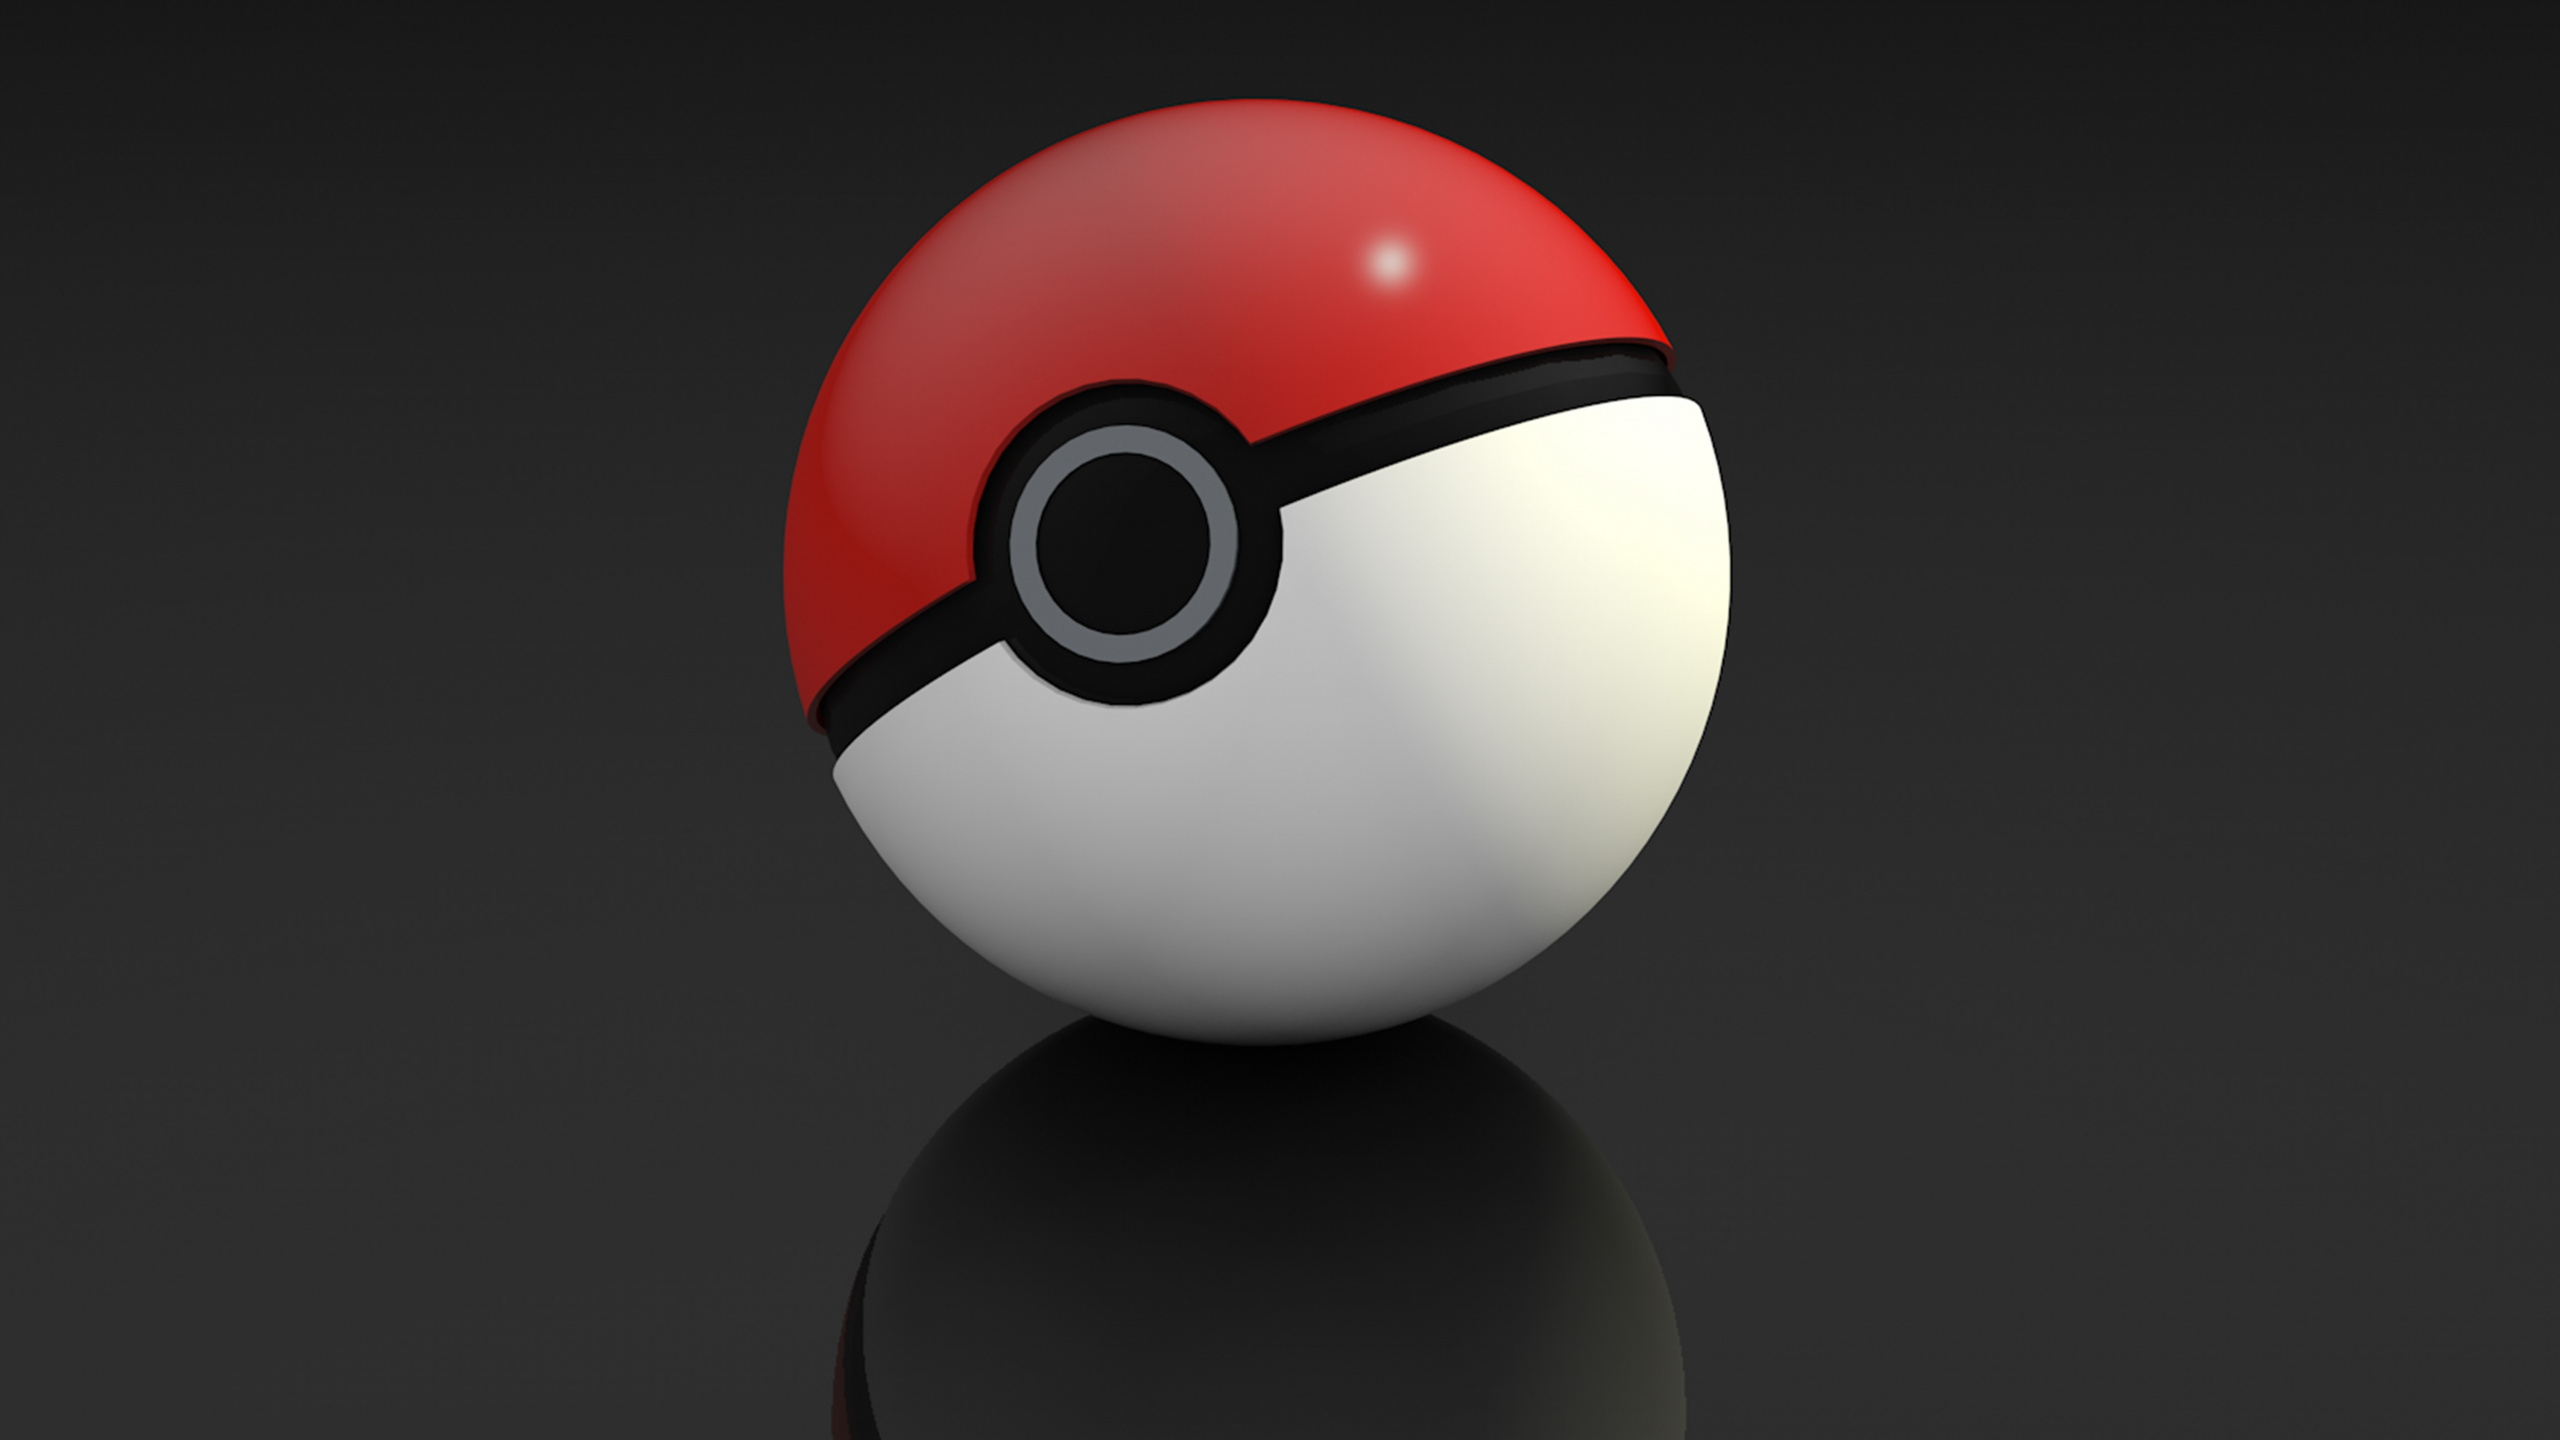 Pok Ball, Ball, Animation, Auge, Games. Wallpaper in 2560x1440 Resolution